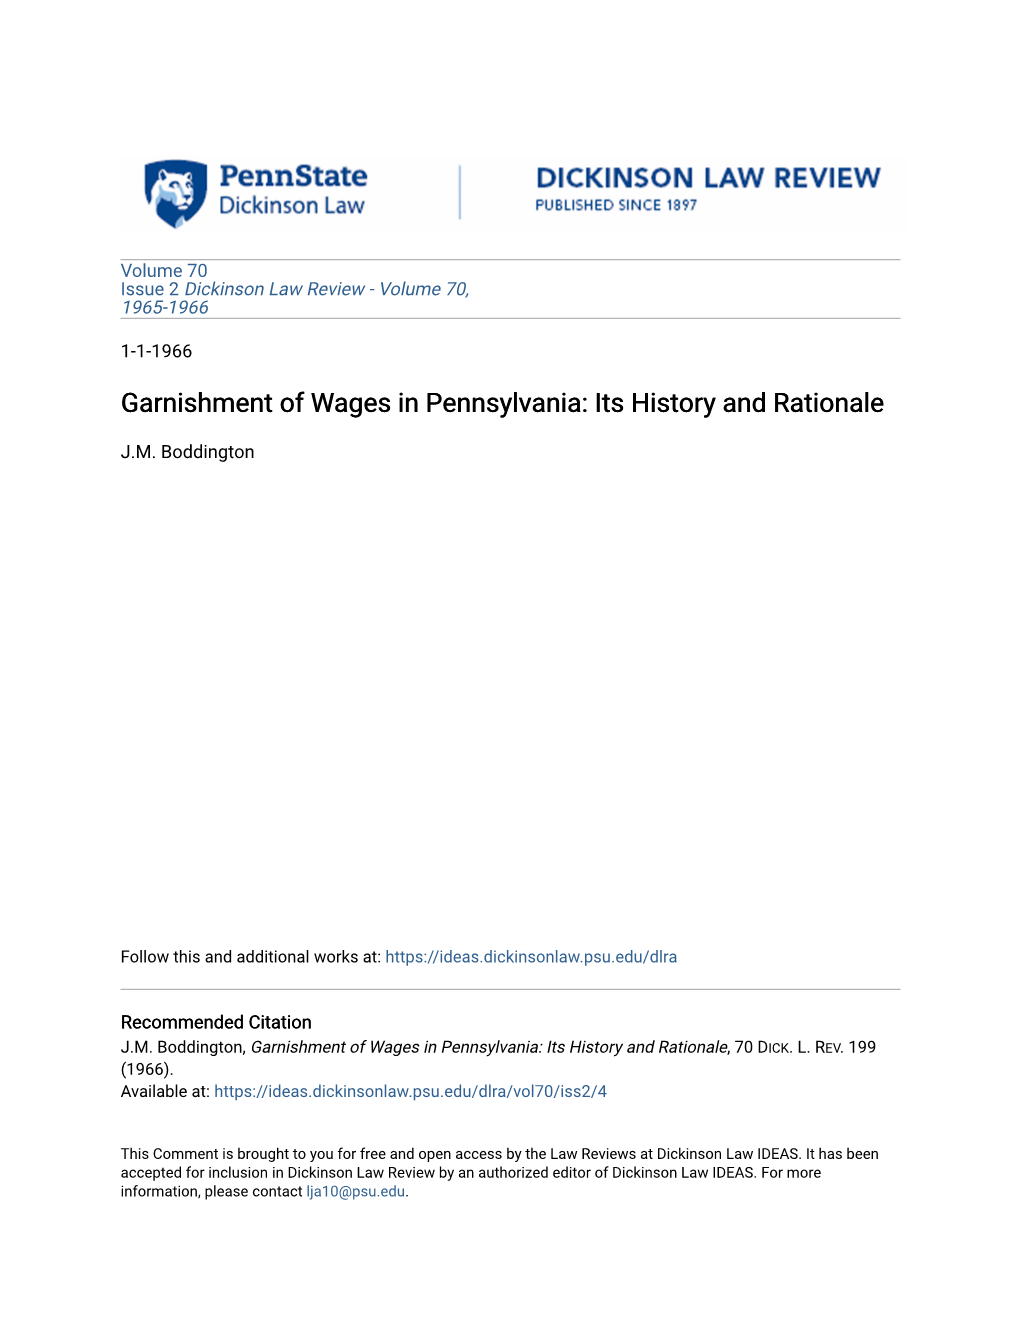 Garnishment of Wages in Pennsylvania: Its History and Rationale